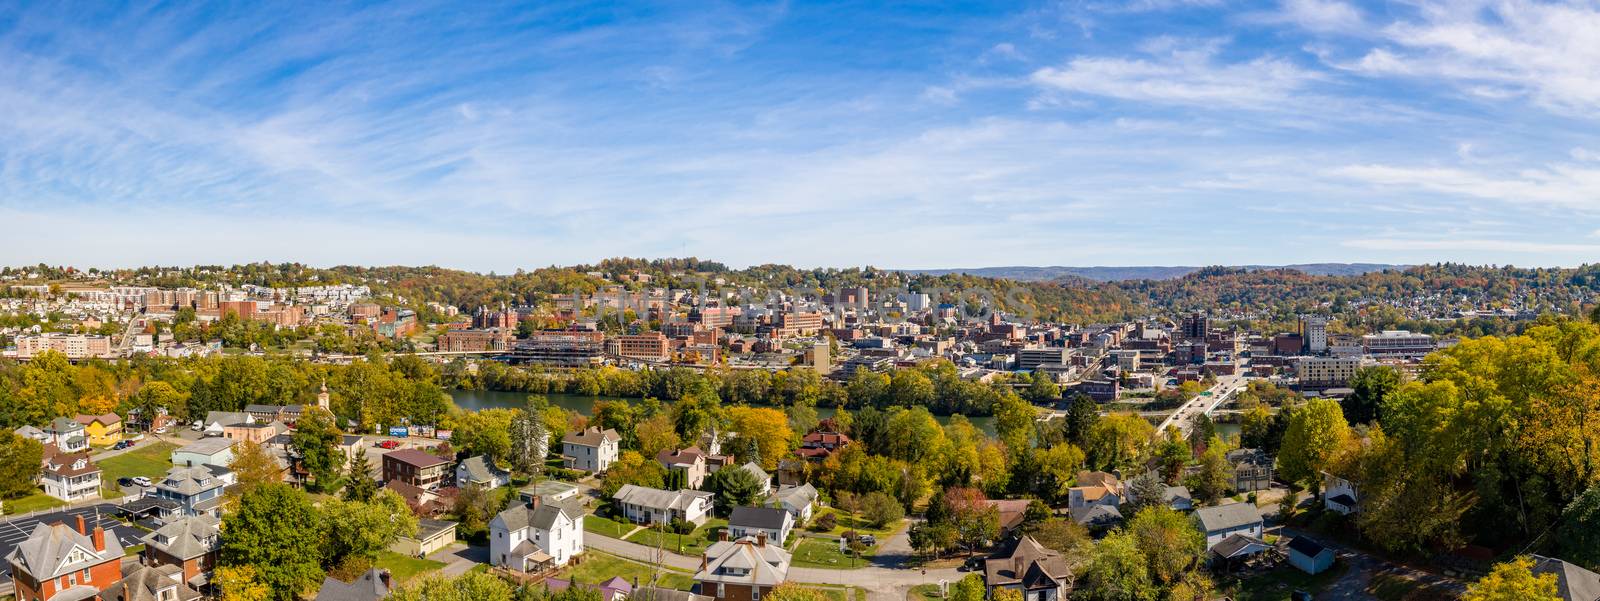 Aerial drone panorama of the downtown area and university in Morgantown, West Virginia by steheap